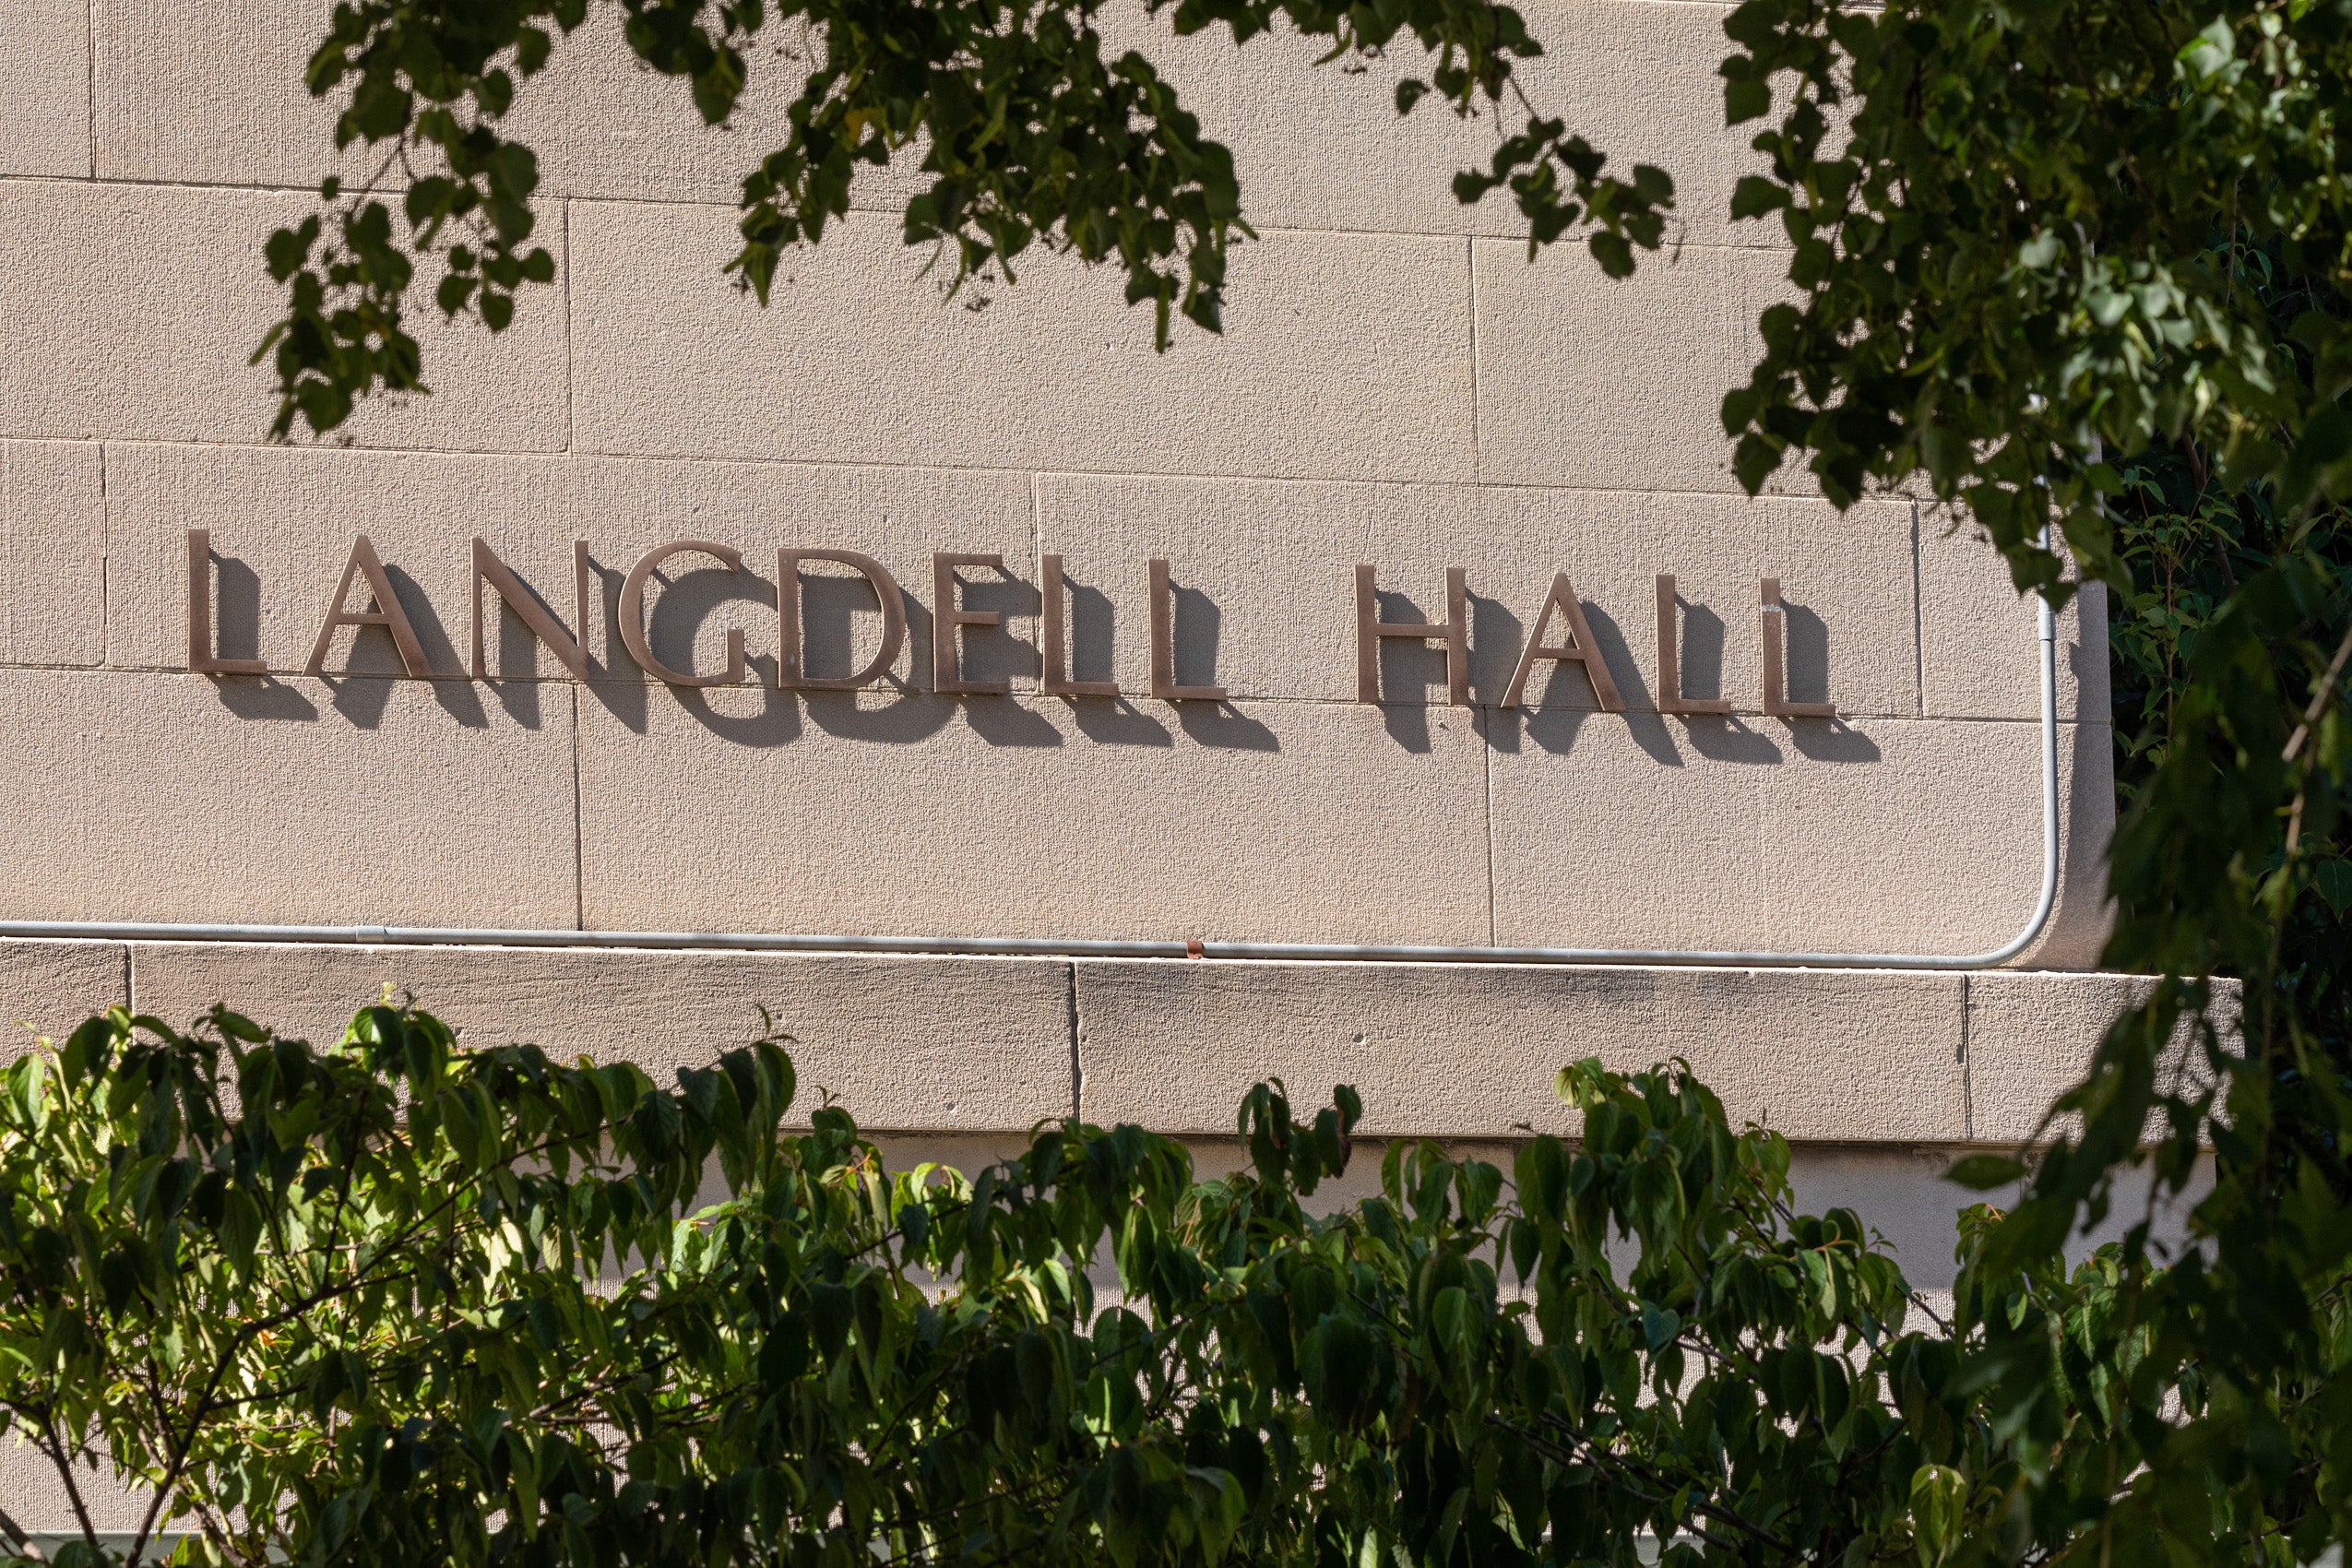 Front doors to Langdell Hall